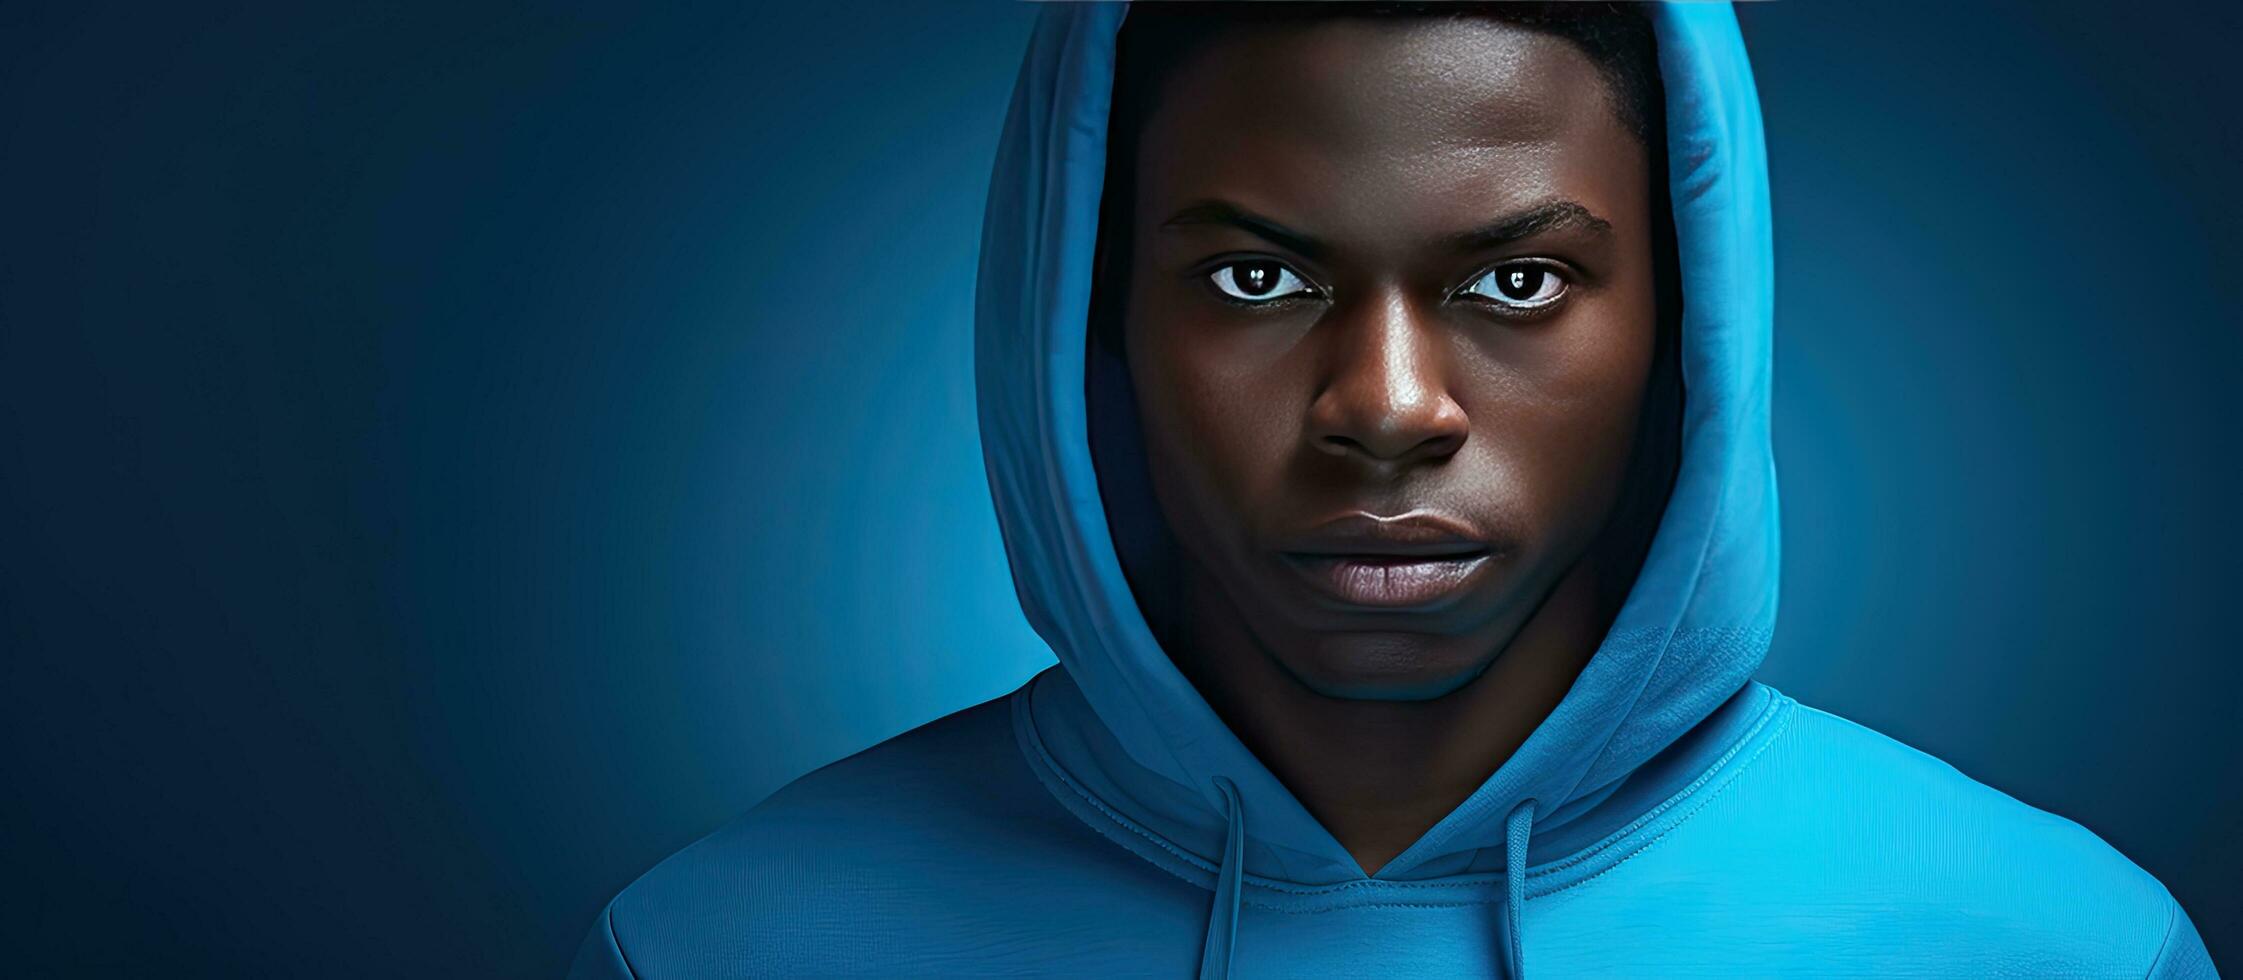 Studio portrait of a young African man wearing a blue hoodie with room for text photo